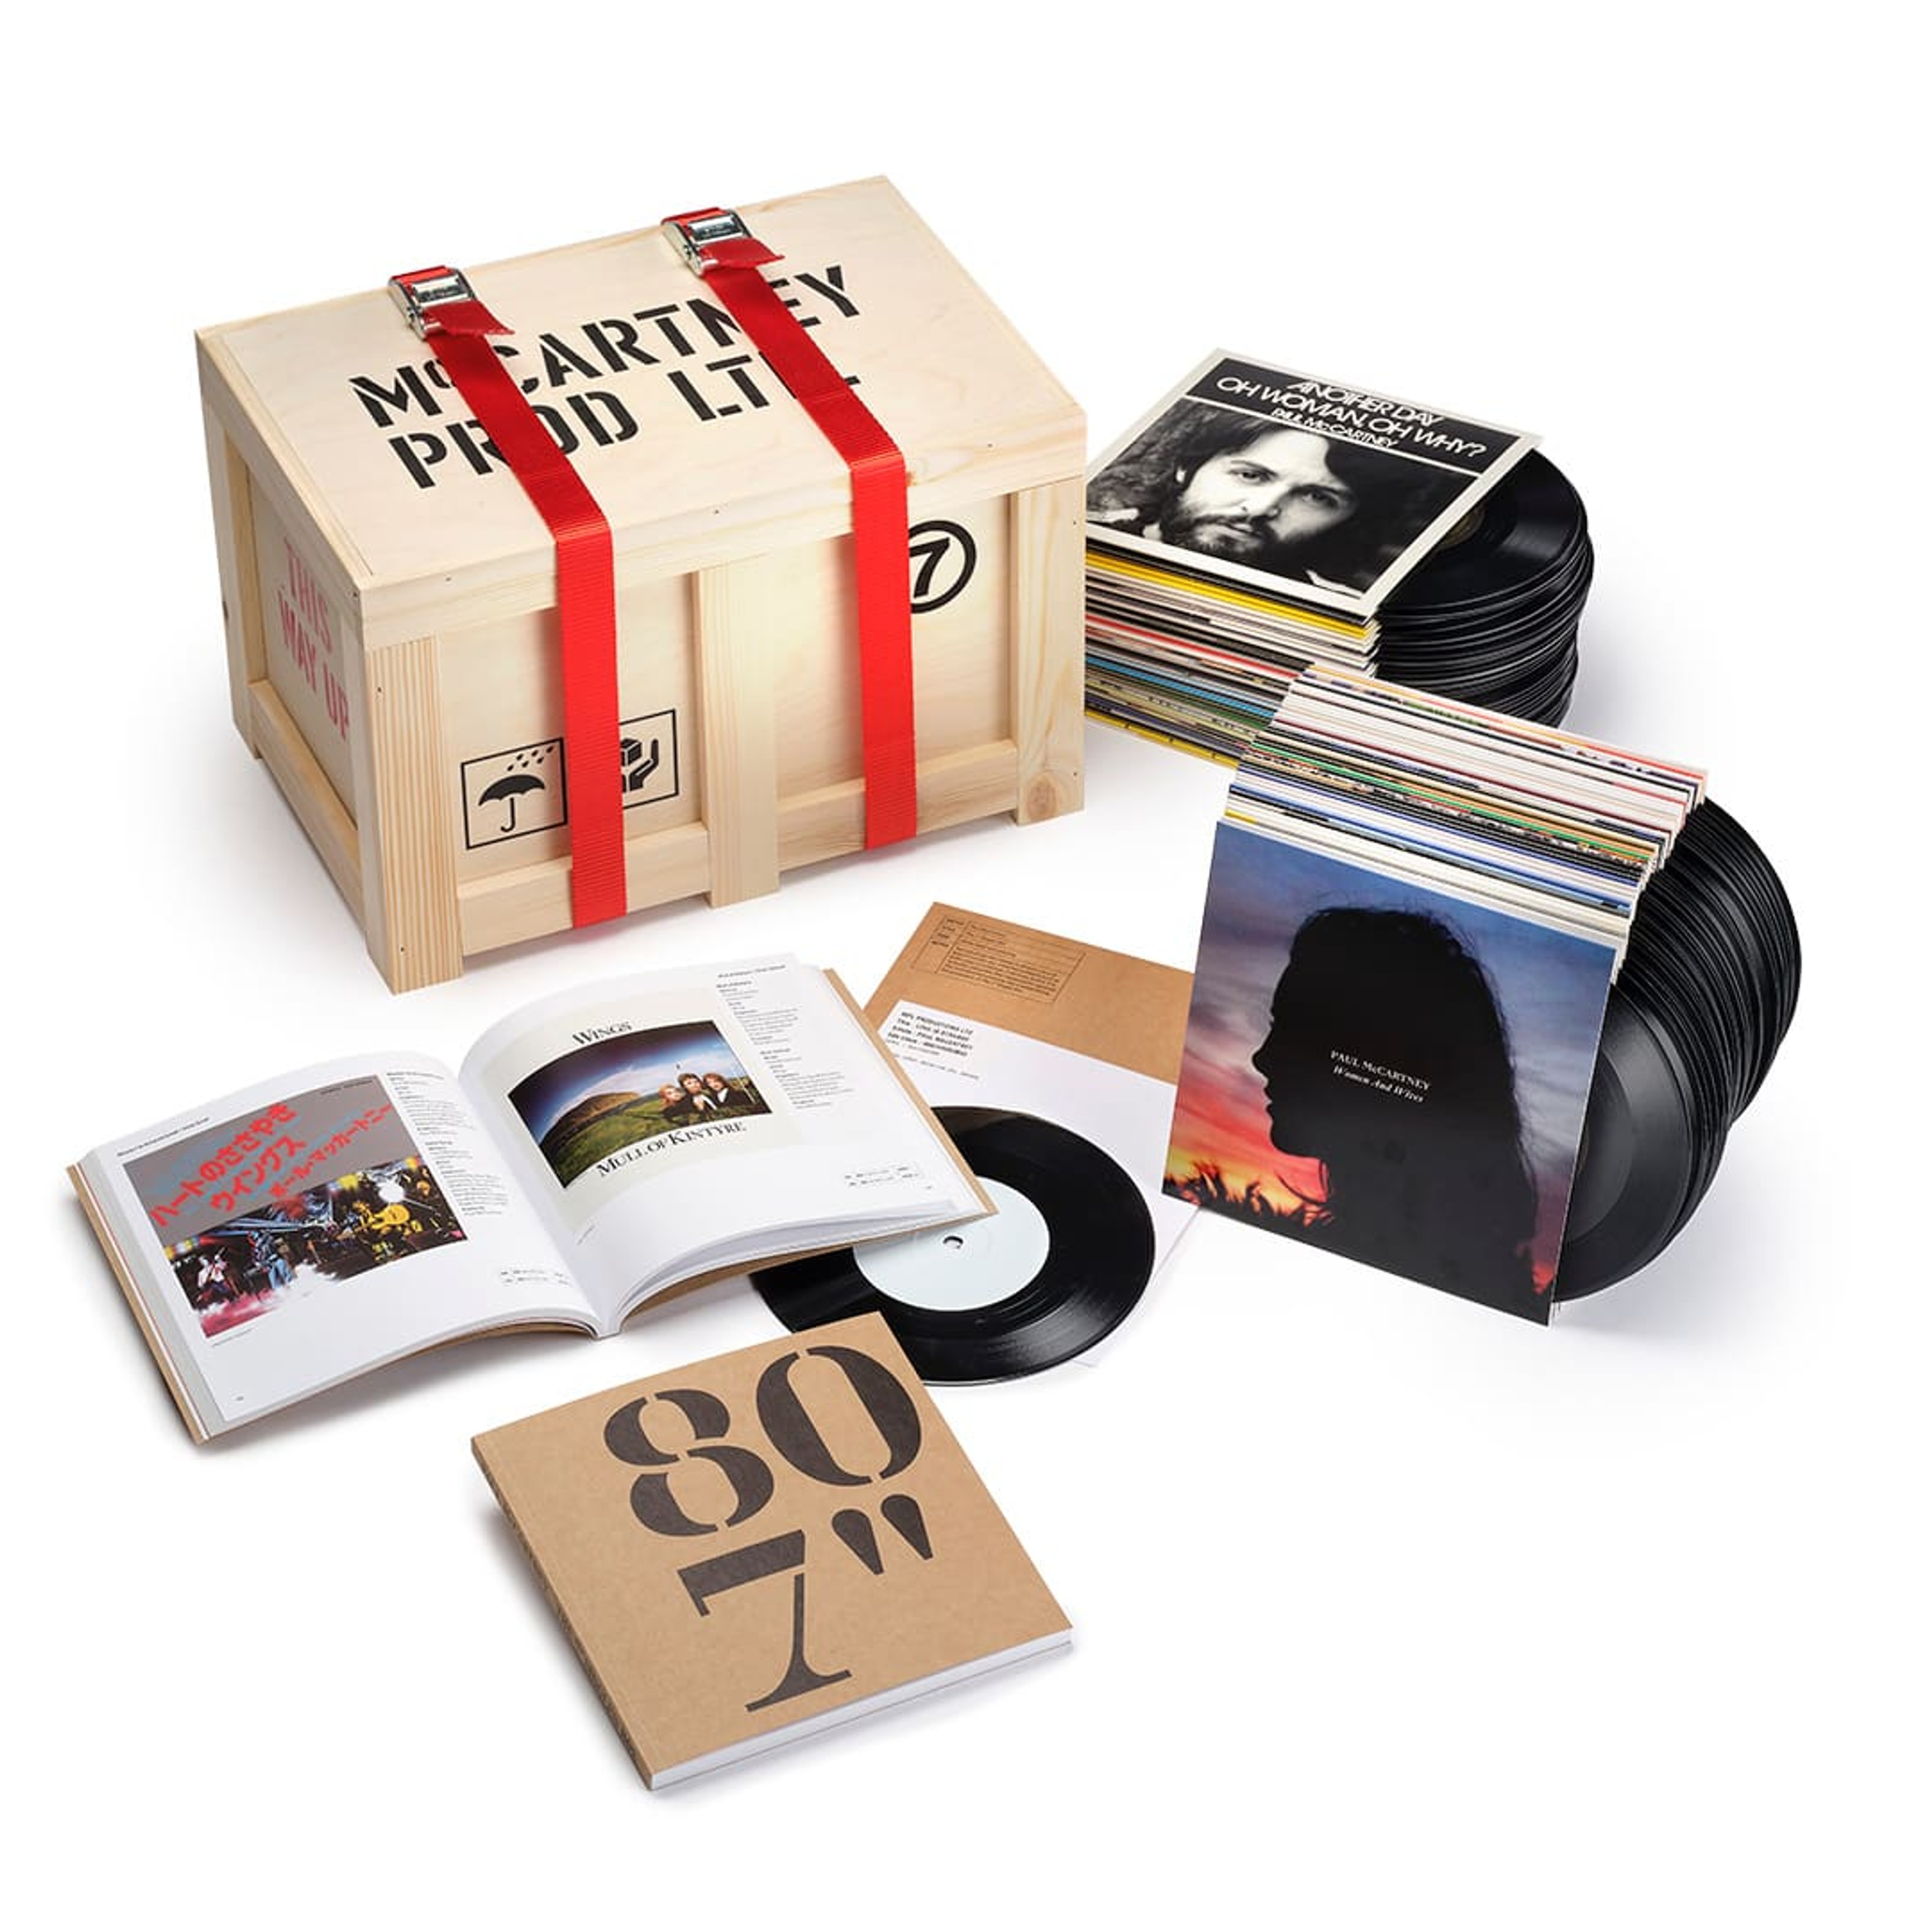 Photo of 'The 7" Singles Box' release which includes 80 7" vinyl, 148-page book including containing foreword from Paul, essay by Rob Sheffield, recording notes, release dates, and chart information.